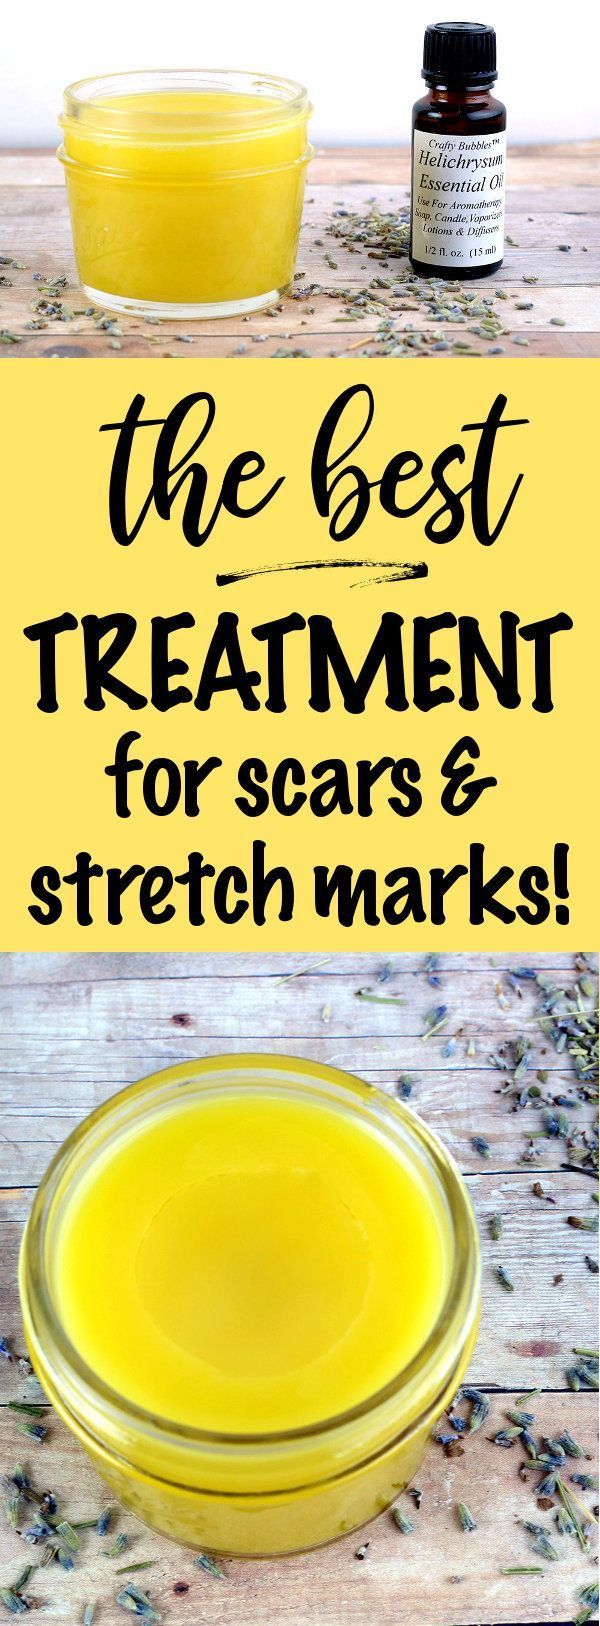 Best Scar and Stretch Mark Treatment You Can Make at Home -   17 skin care Natural it works ideas